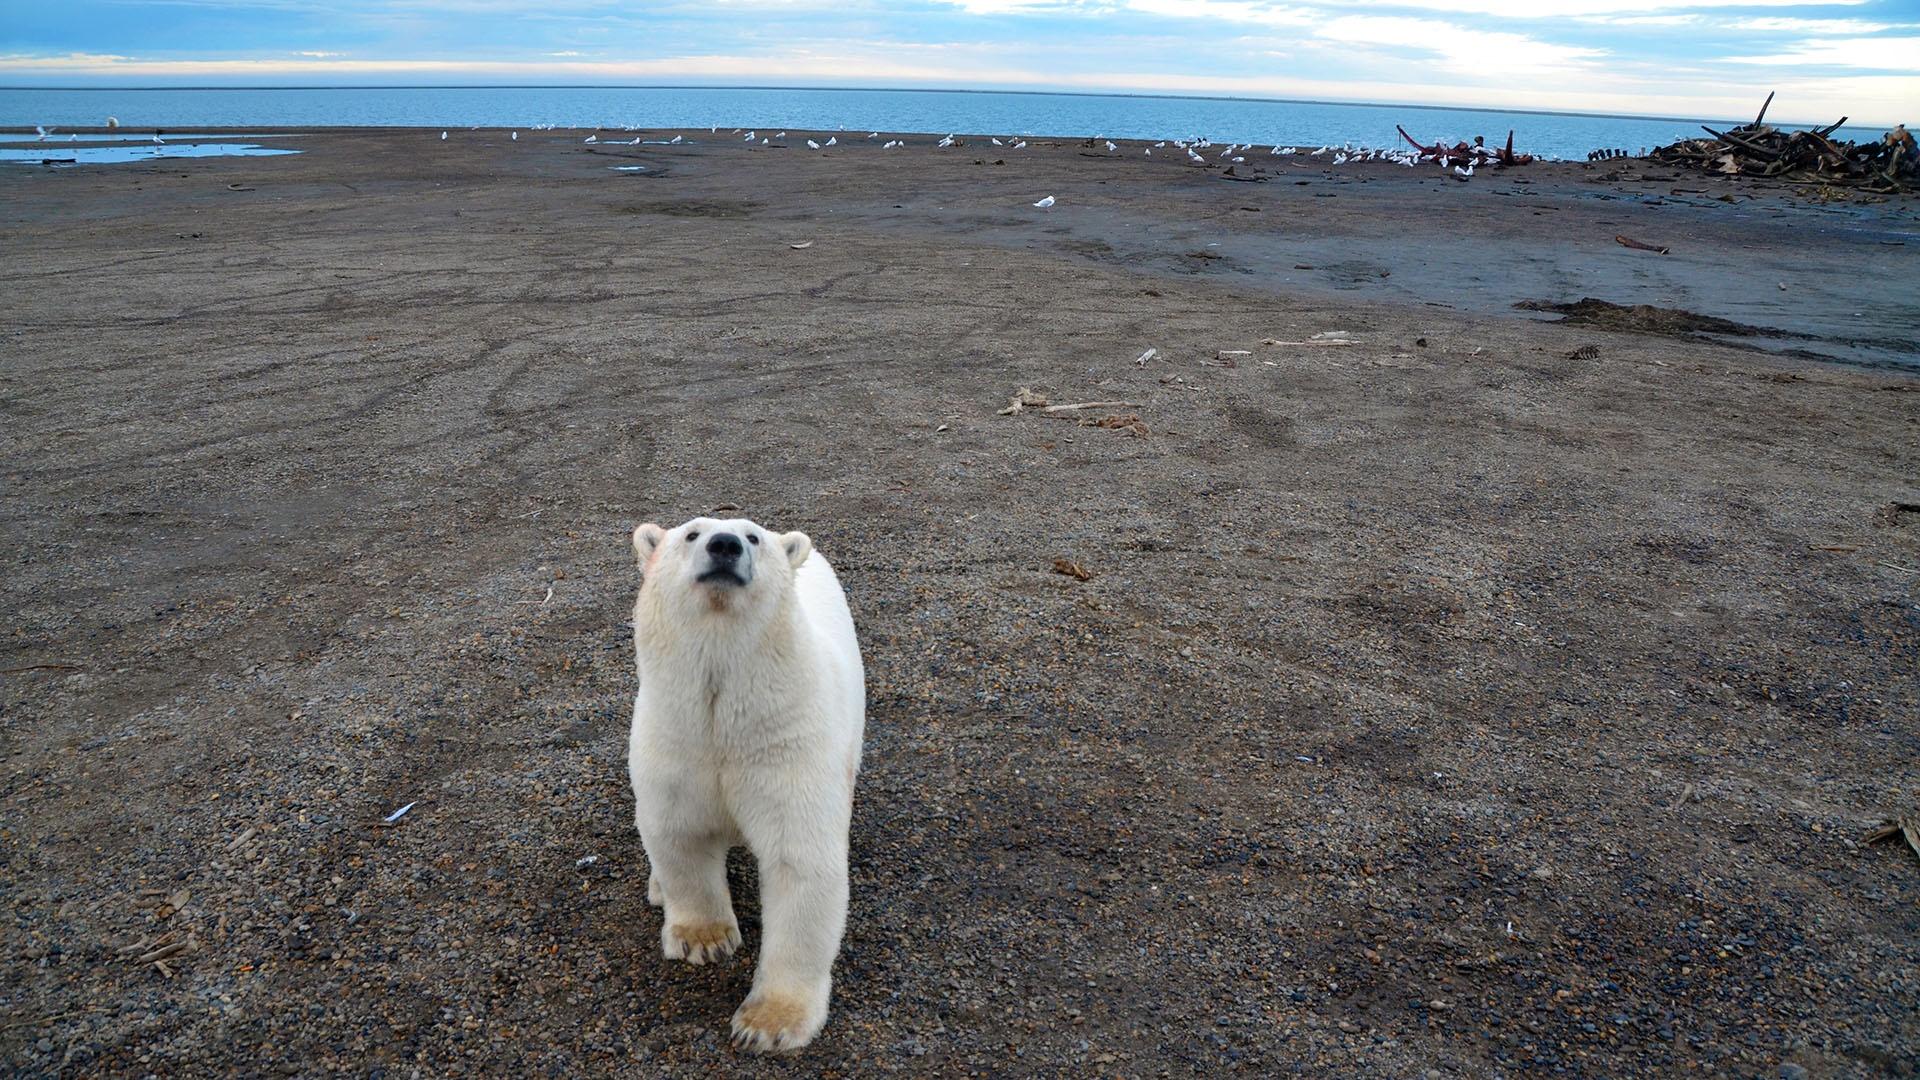 A curious polar bear approaches the camera with Bone Pile in background.